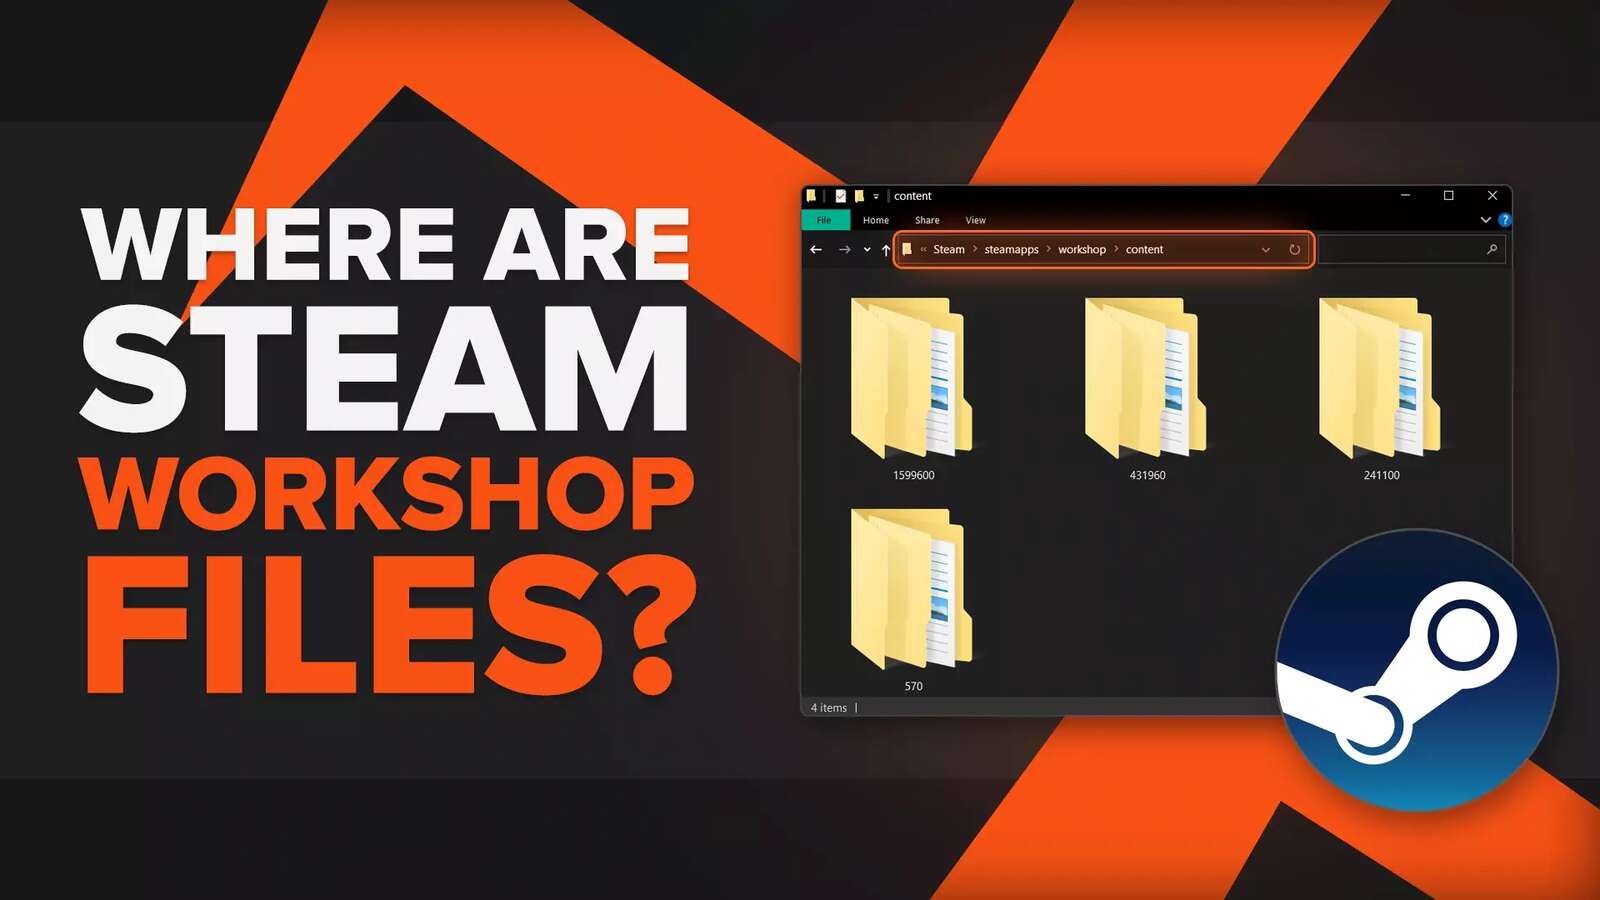 Here's How to Find & Locate Steam Workshop Files